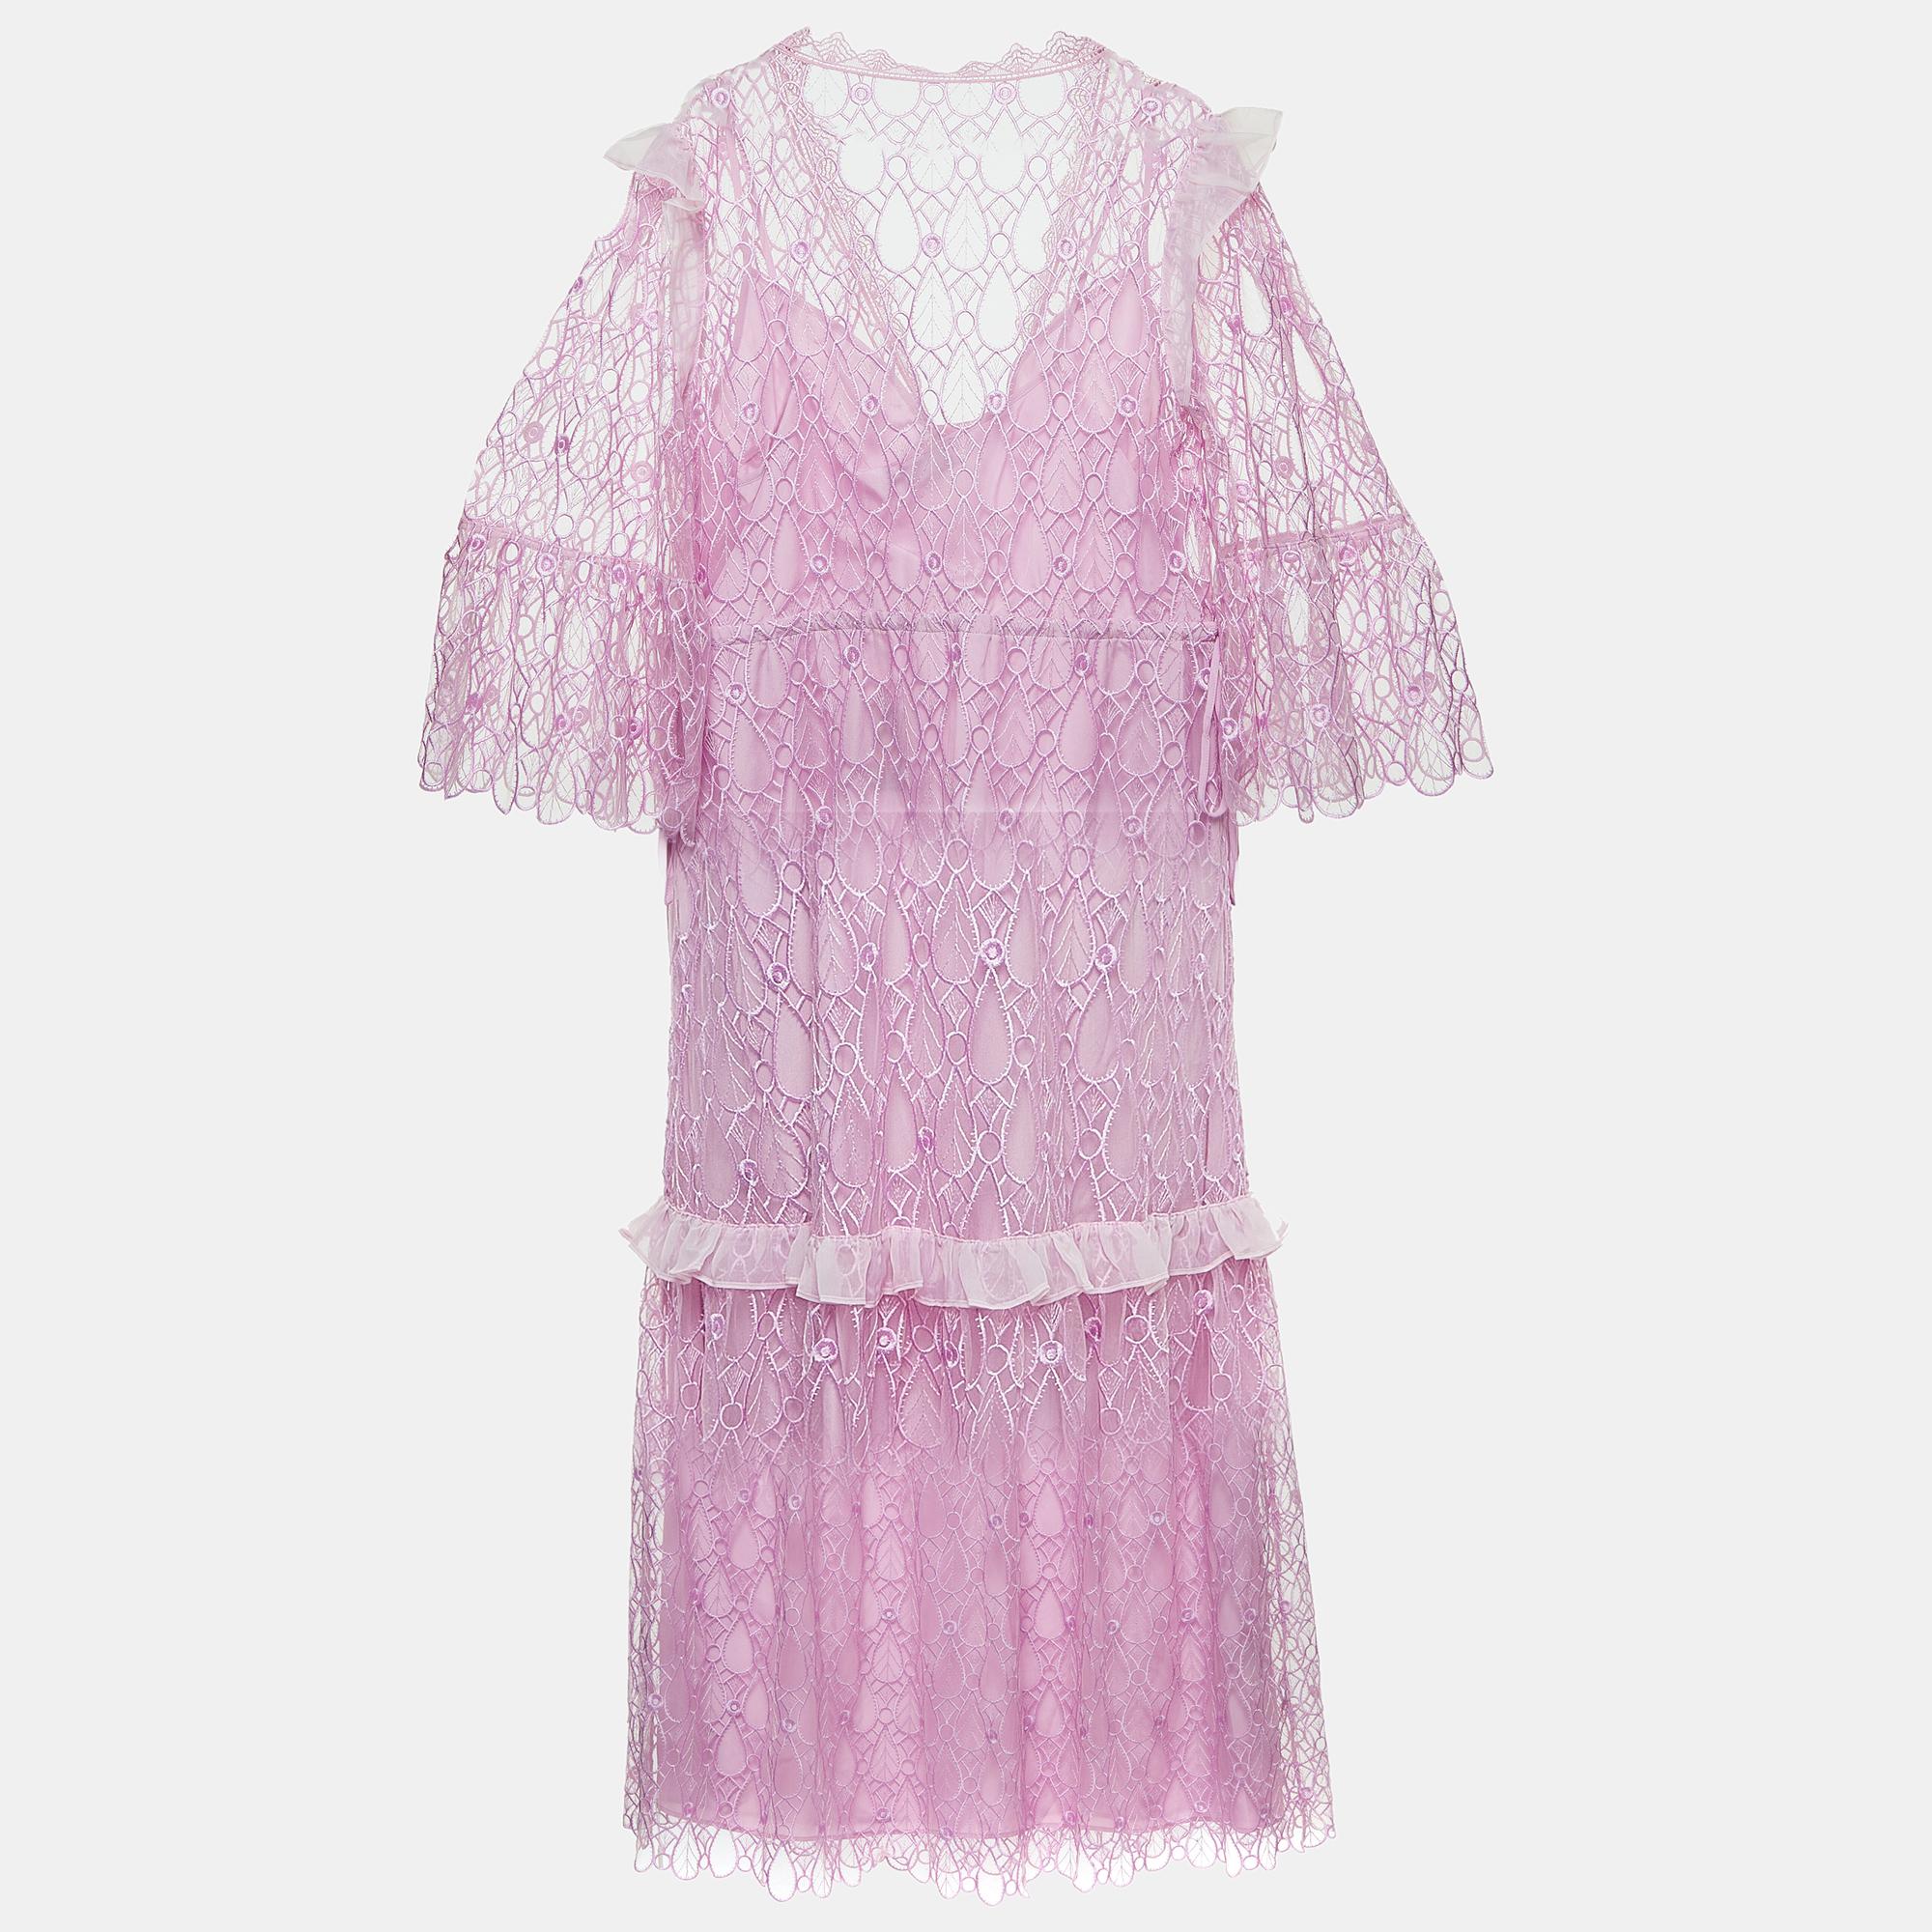 Another dress from Self-Portrait that's too pretty for words is this one. Tailored by experts, the lace overlay dress comes in a soft purple with a V neckline.

